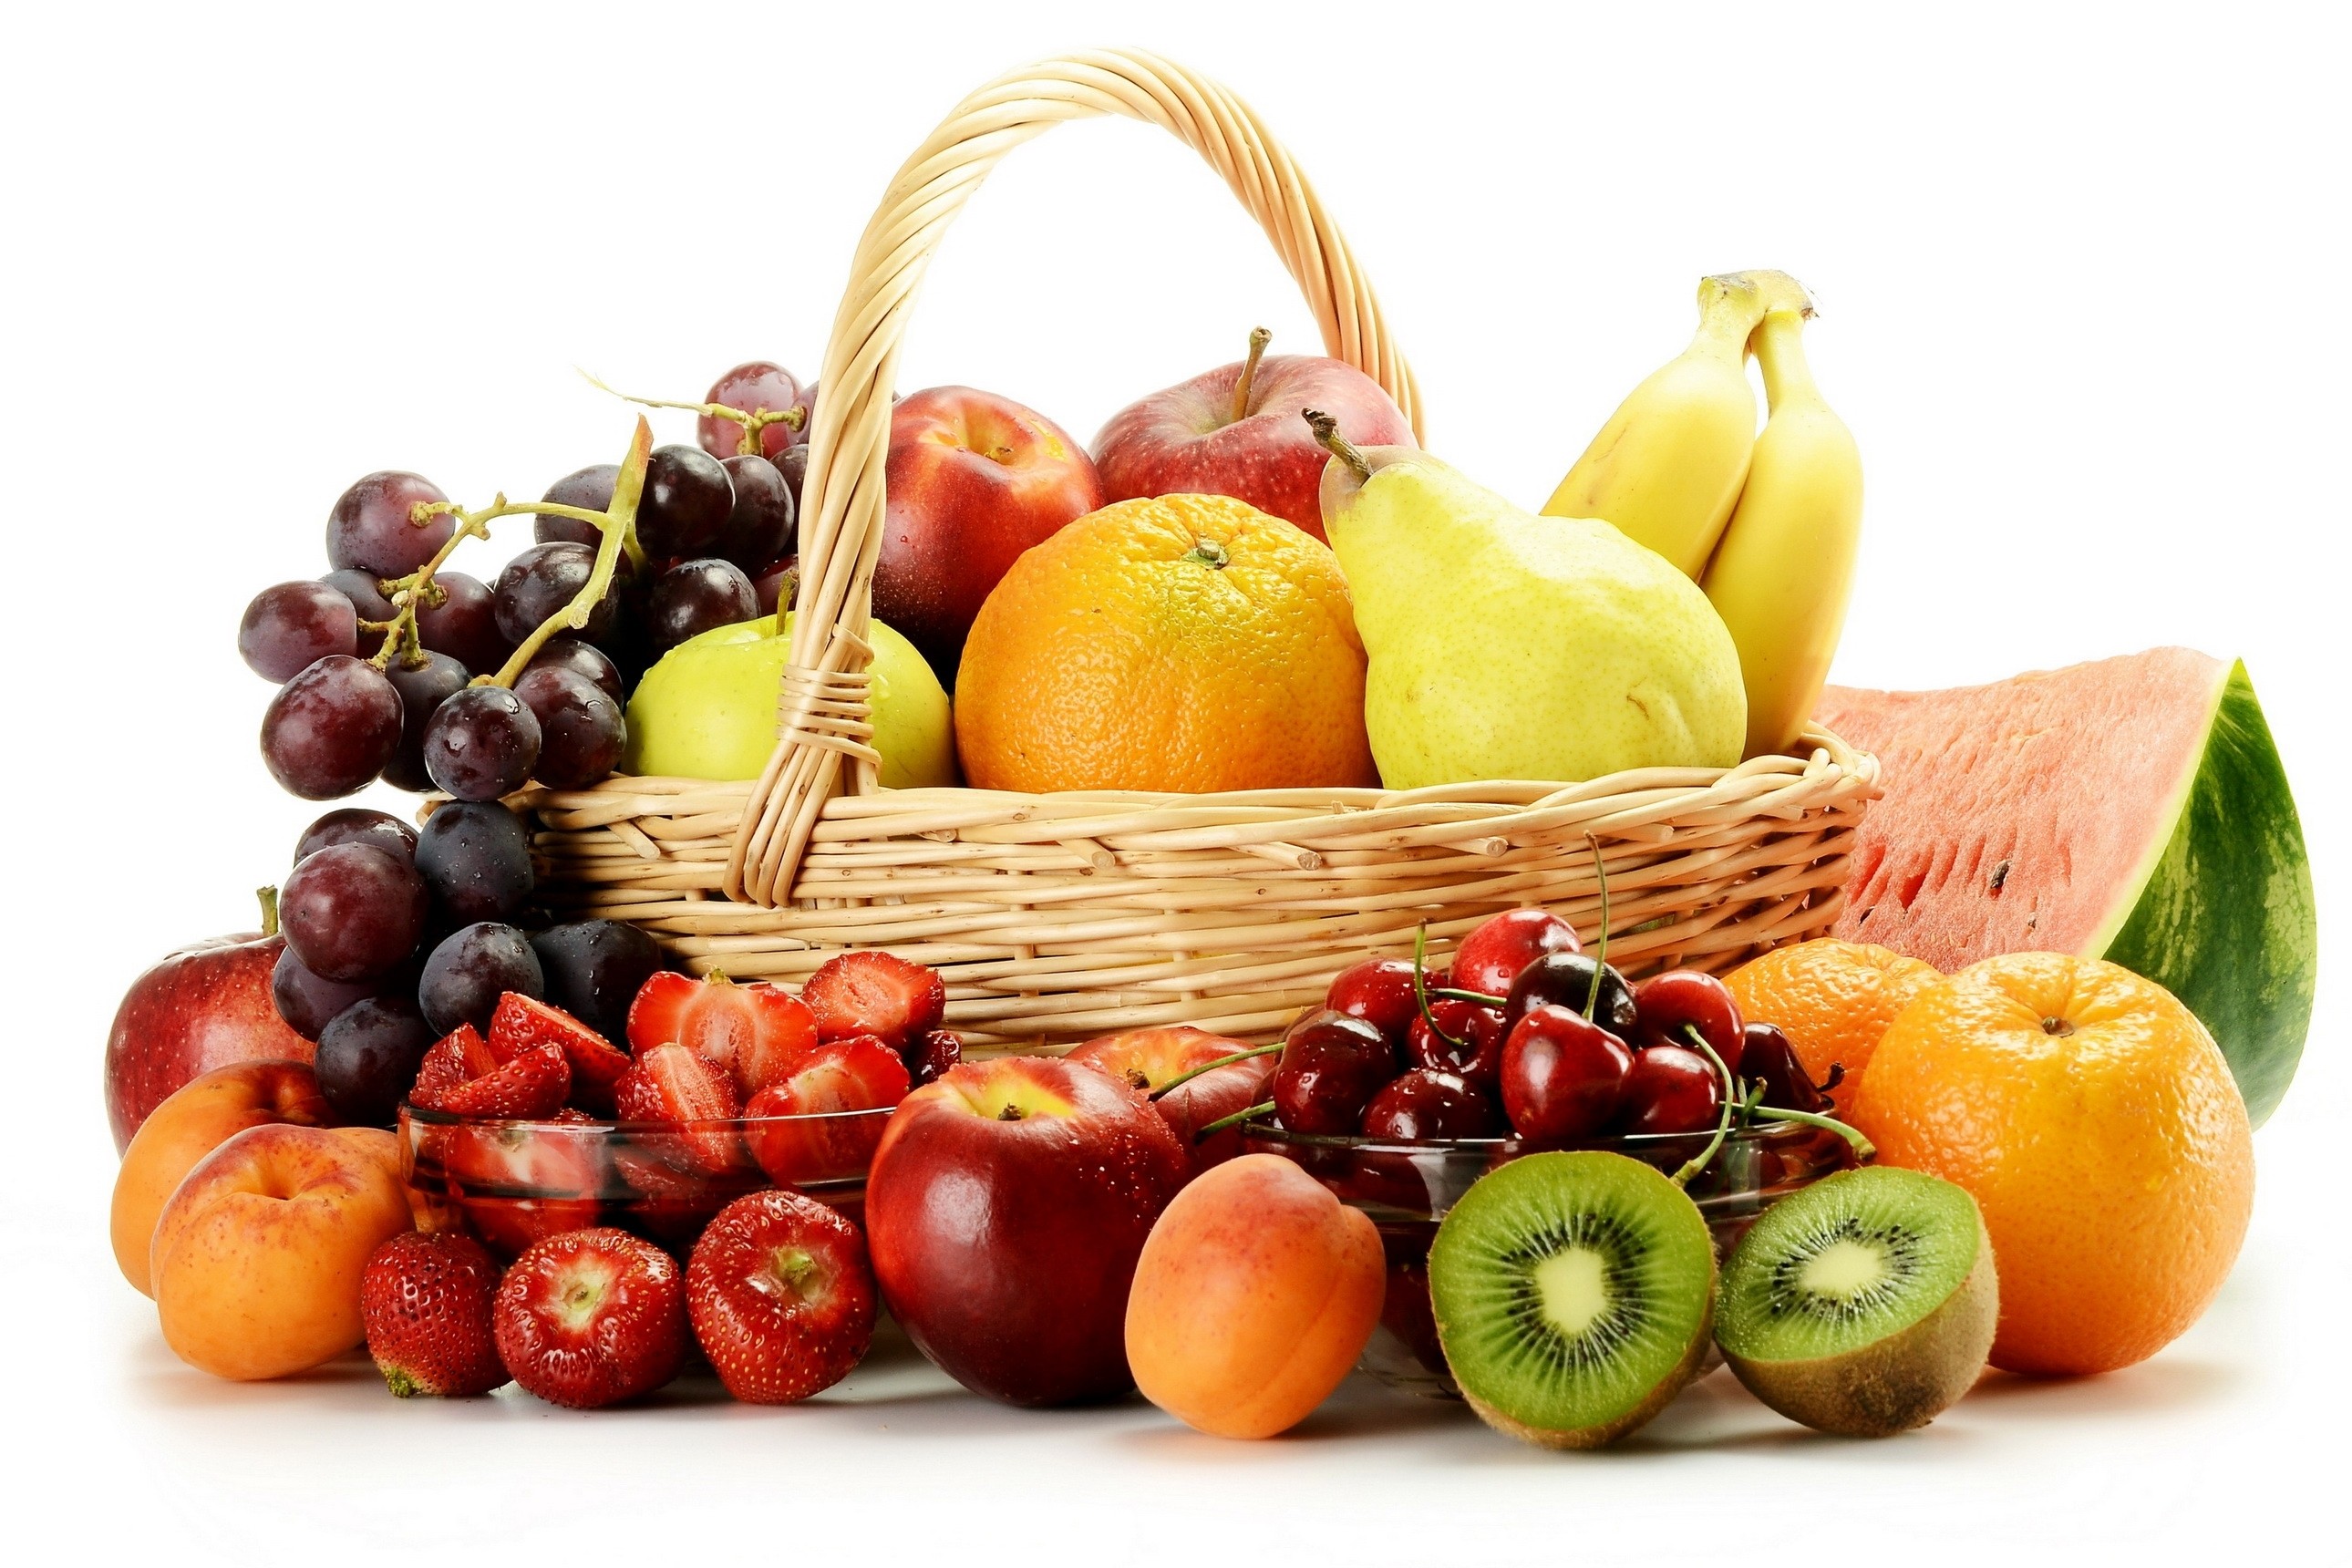 How Many of These Fruits Have You Eaten? - How many have you had?